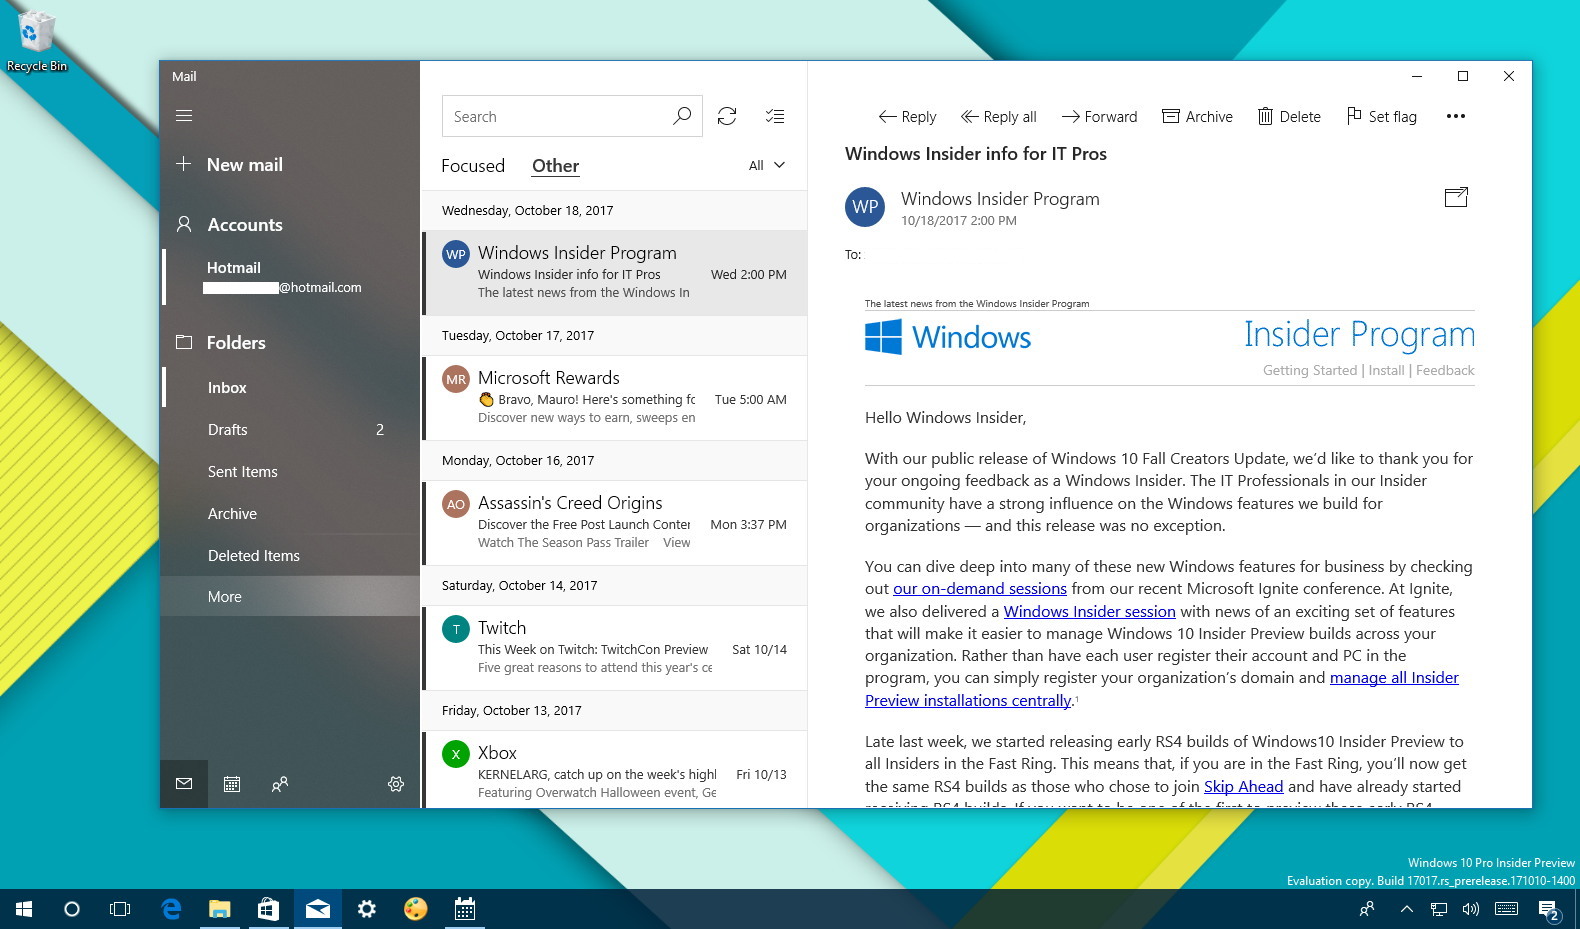 Microsoft's Mail and Calendar apps get new design changes on Windows 10